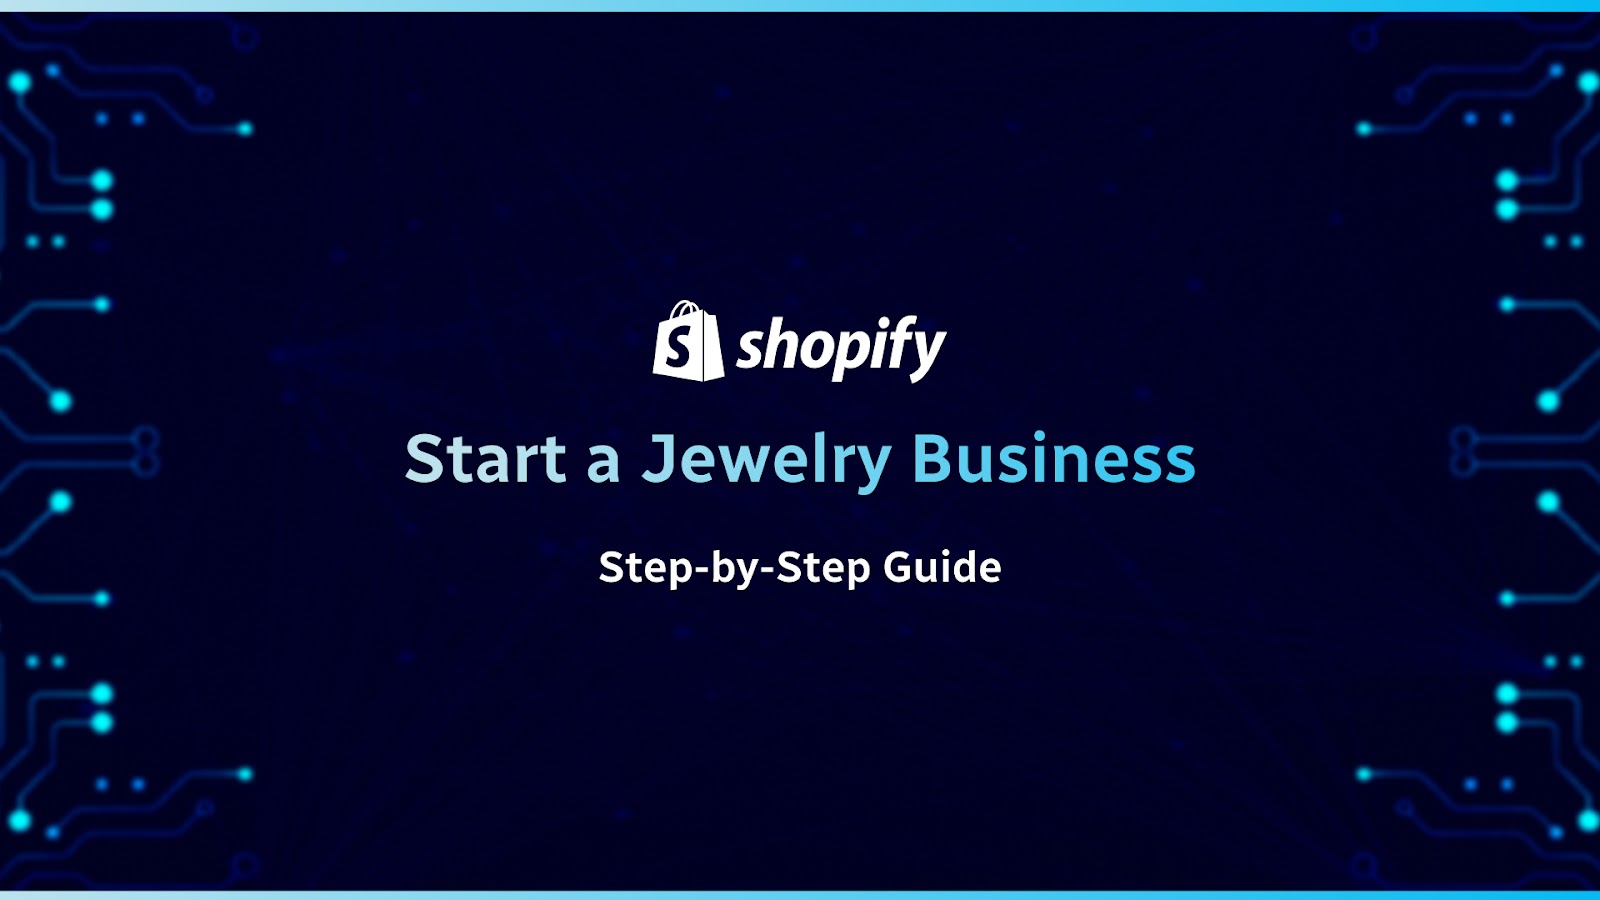 Start a Jewelry Business Online: Step-by-Step Guide